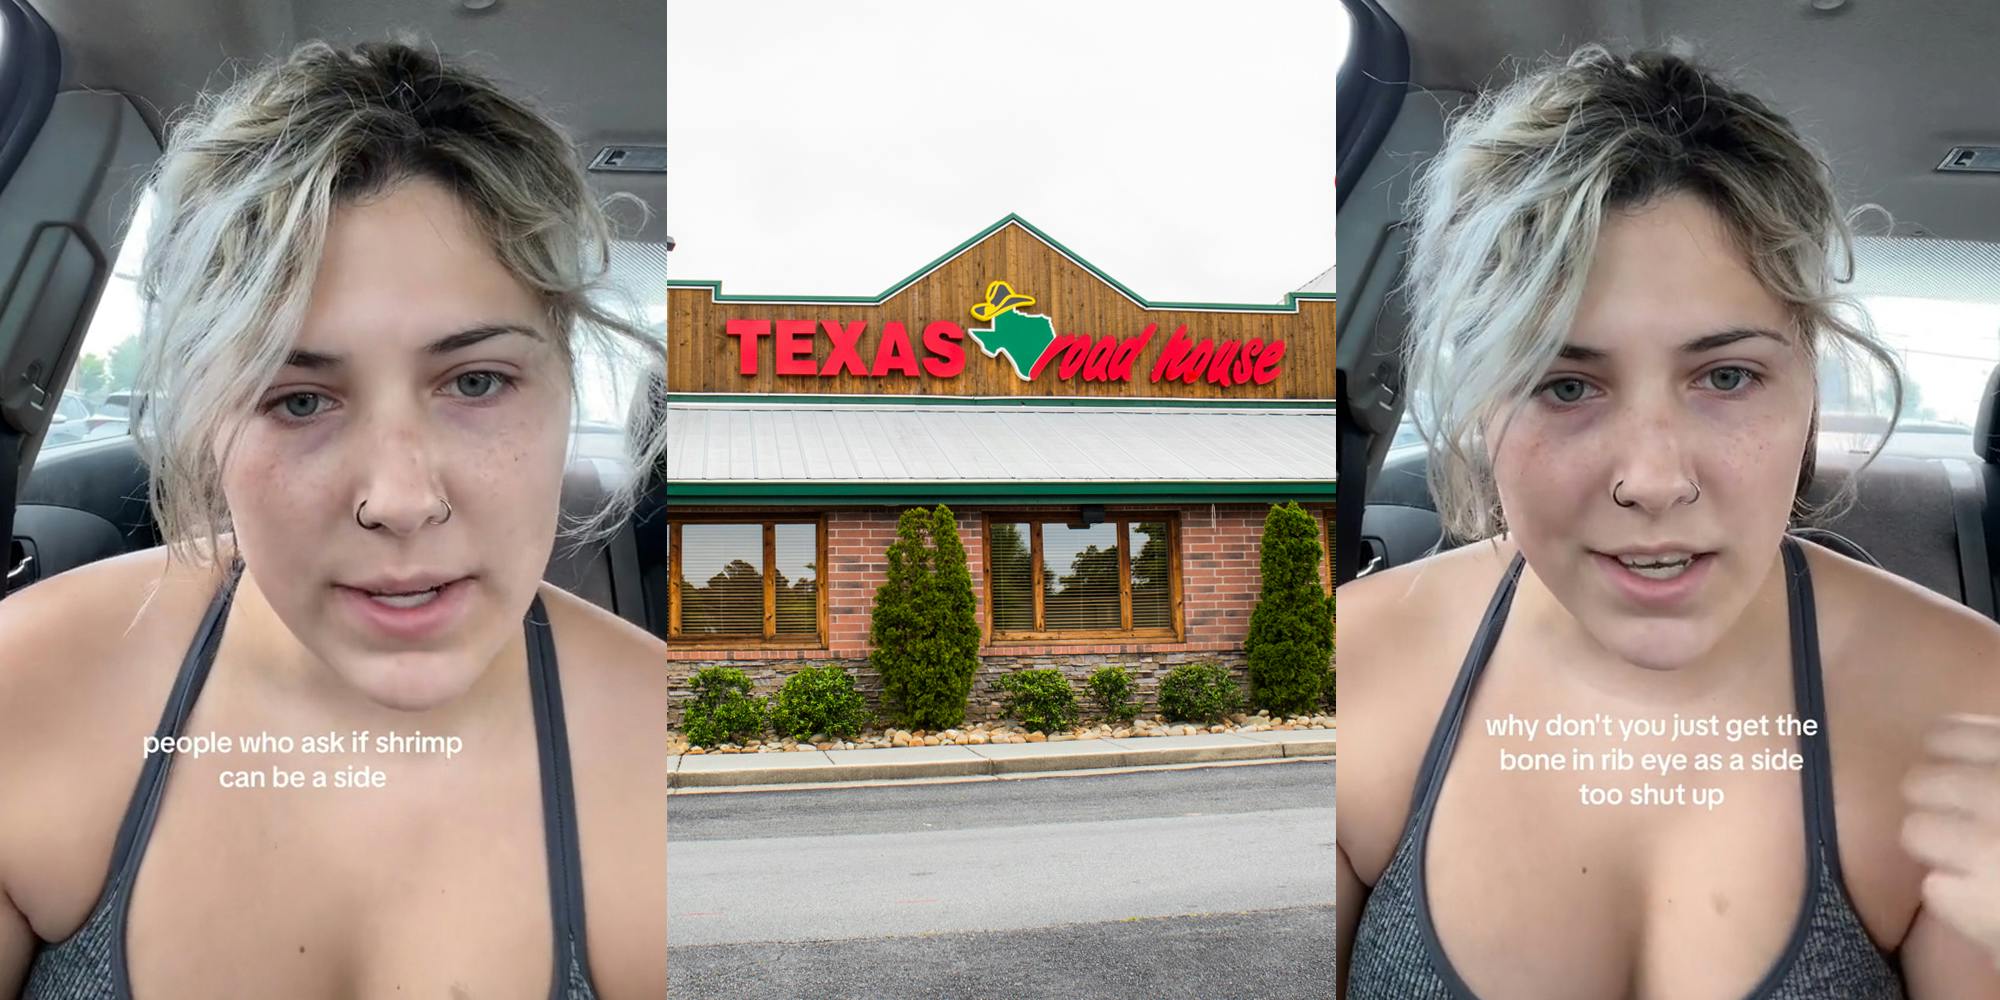 former Texas Roadhouse server speaking in car with caption "people who ask if shrimp can be a side" (l) Texas Roadhouse building with sign (c) former Texas Roadhouse server speaking in car with caption "why don't you just get the bone in rib eye as a side too shut up" (r)